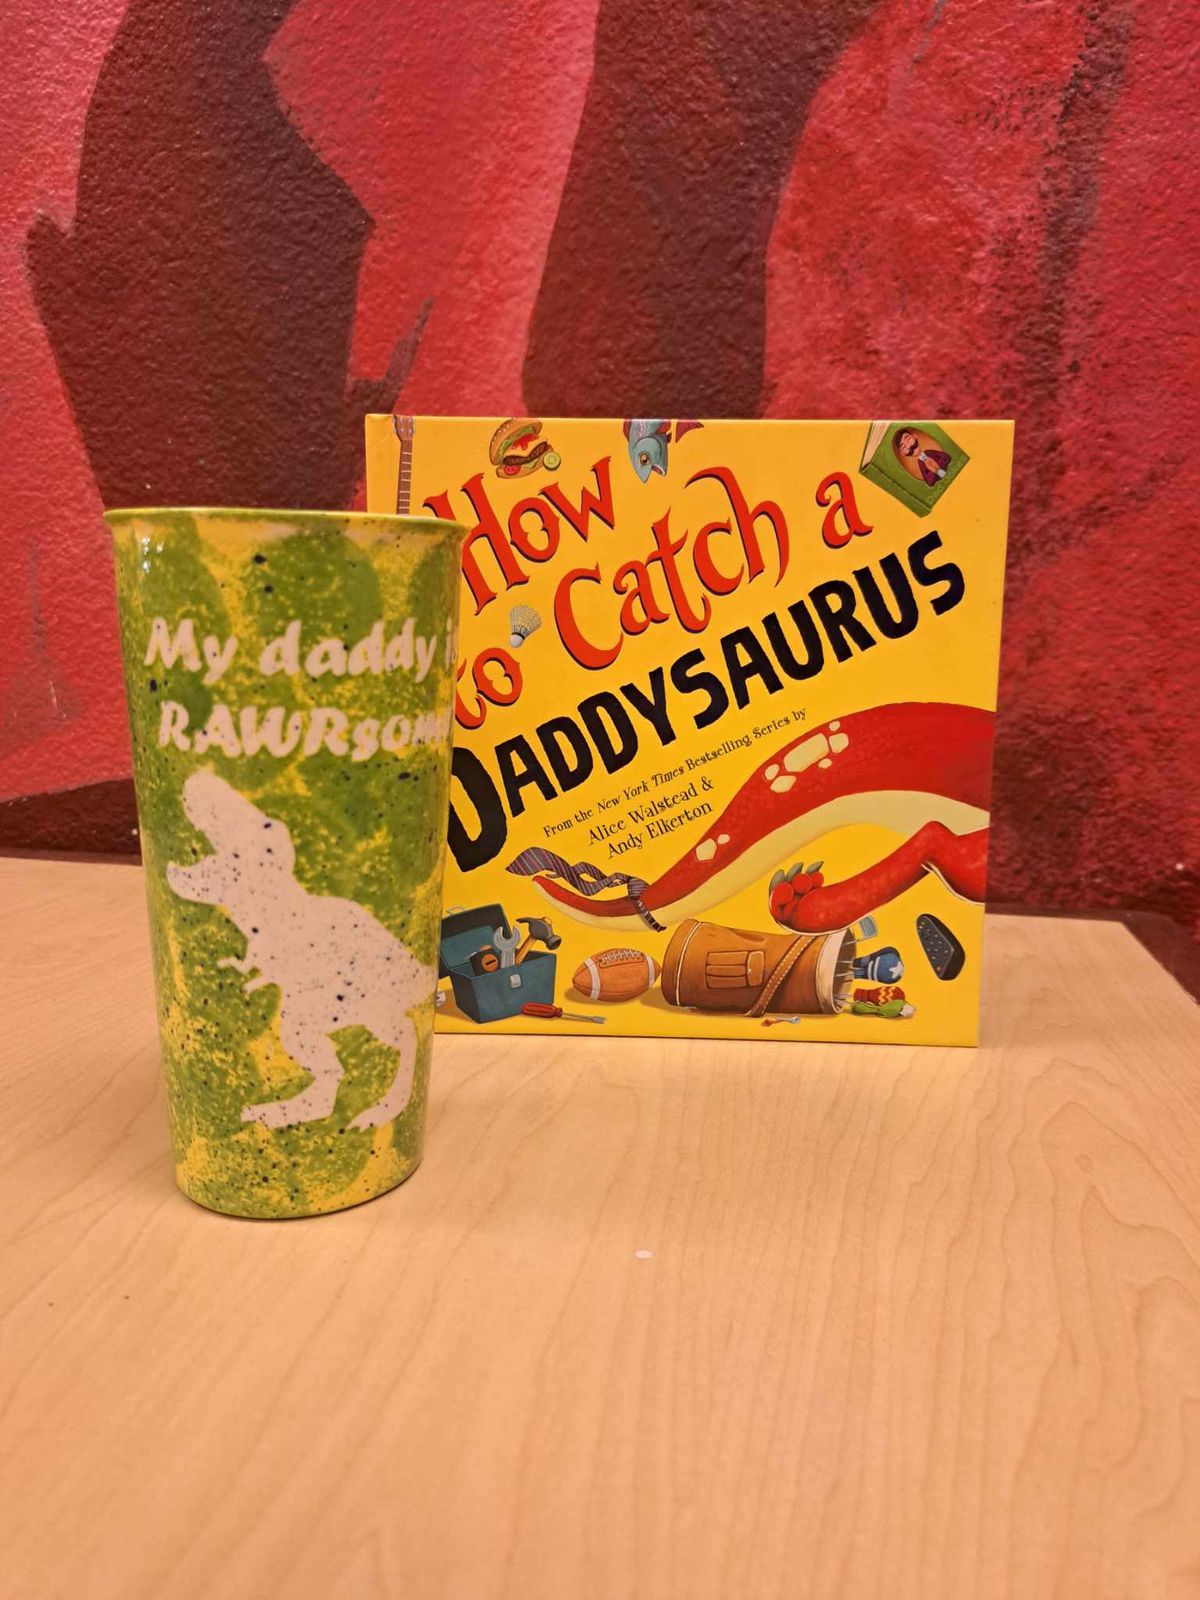 June Toddler Time: How to Catch a Daddysaurus!